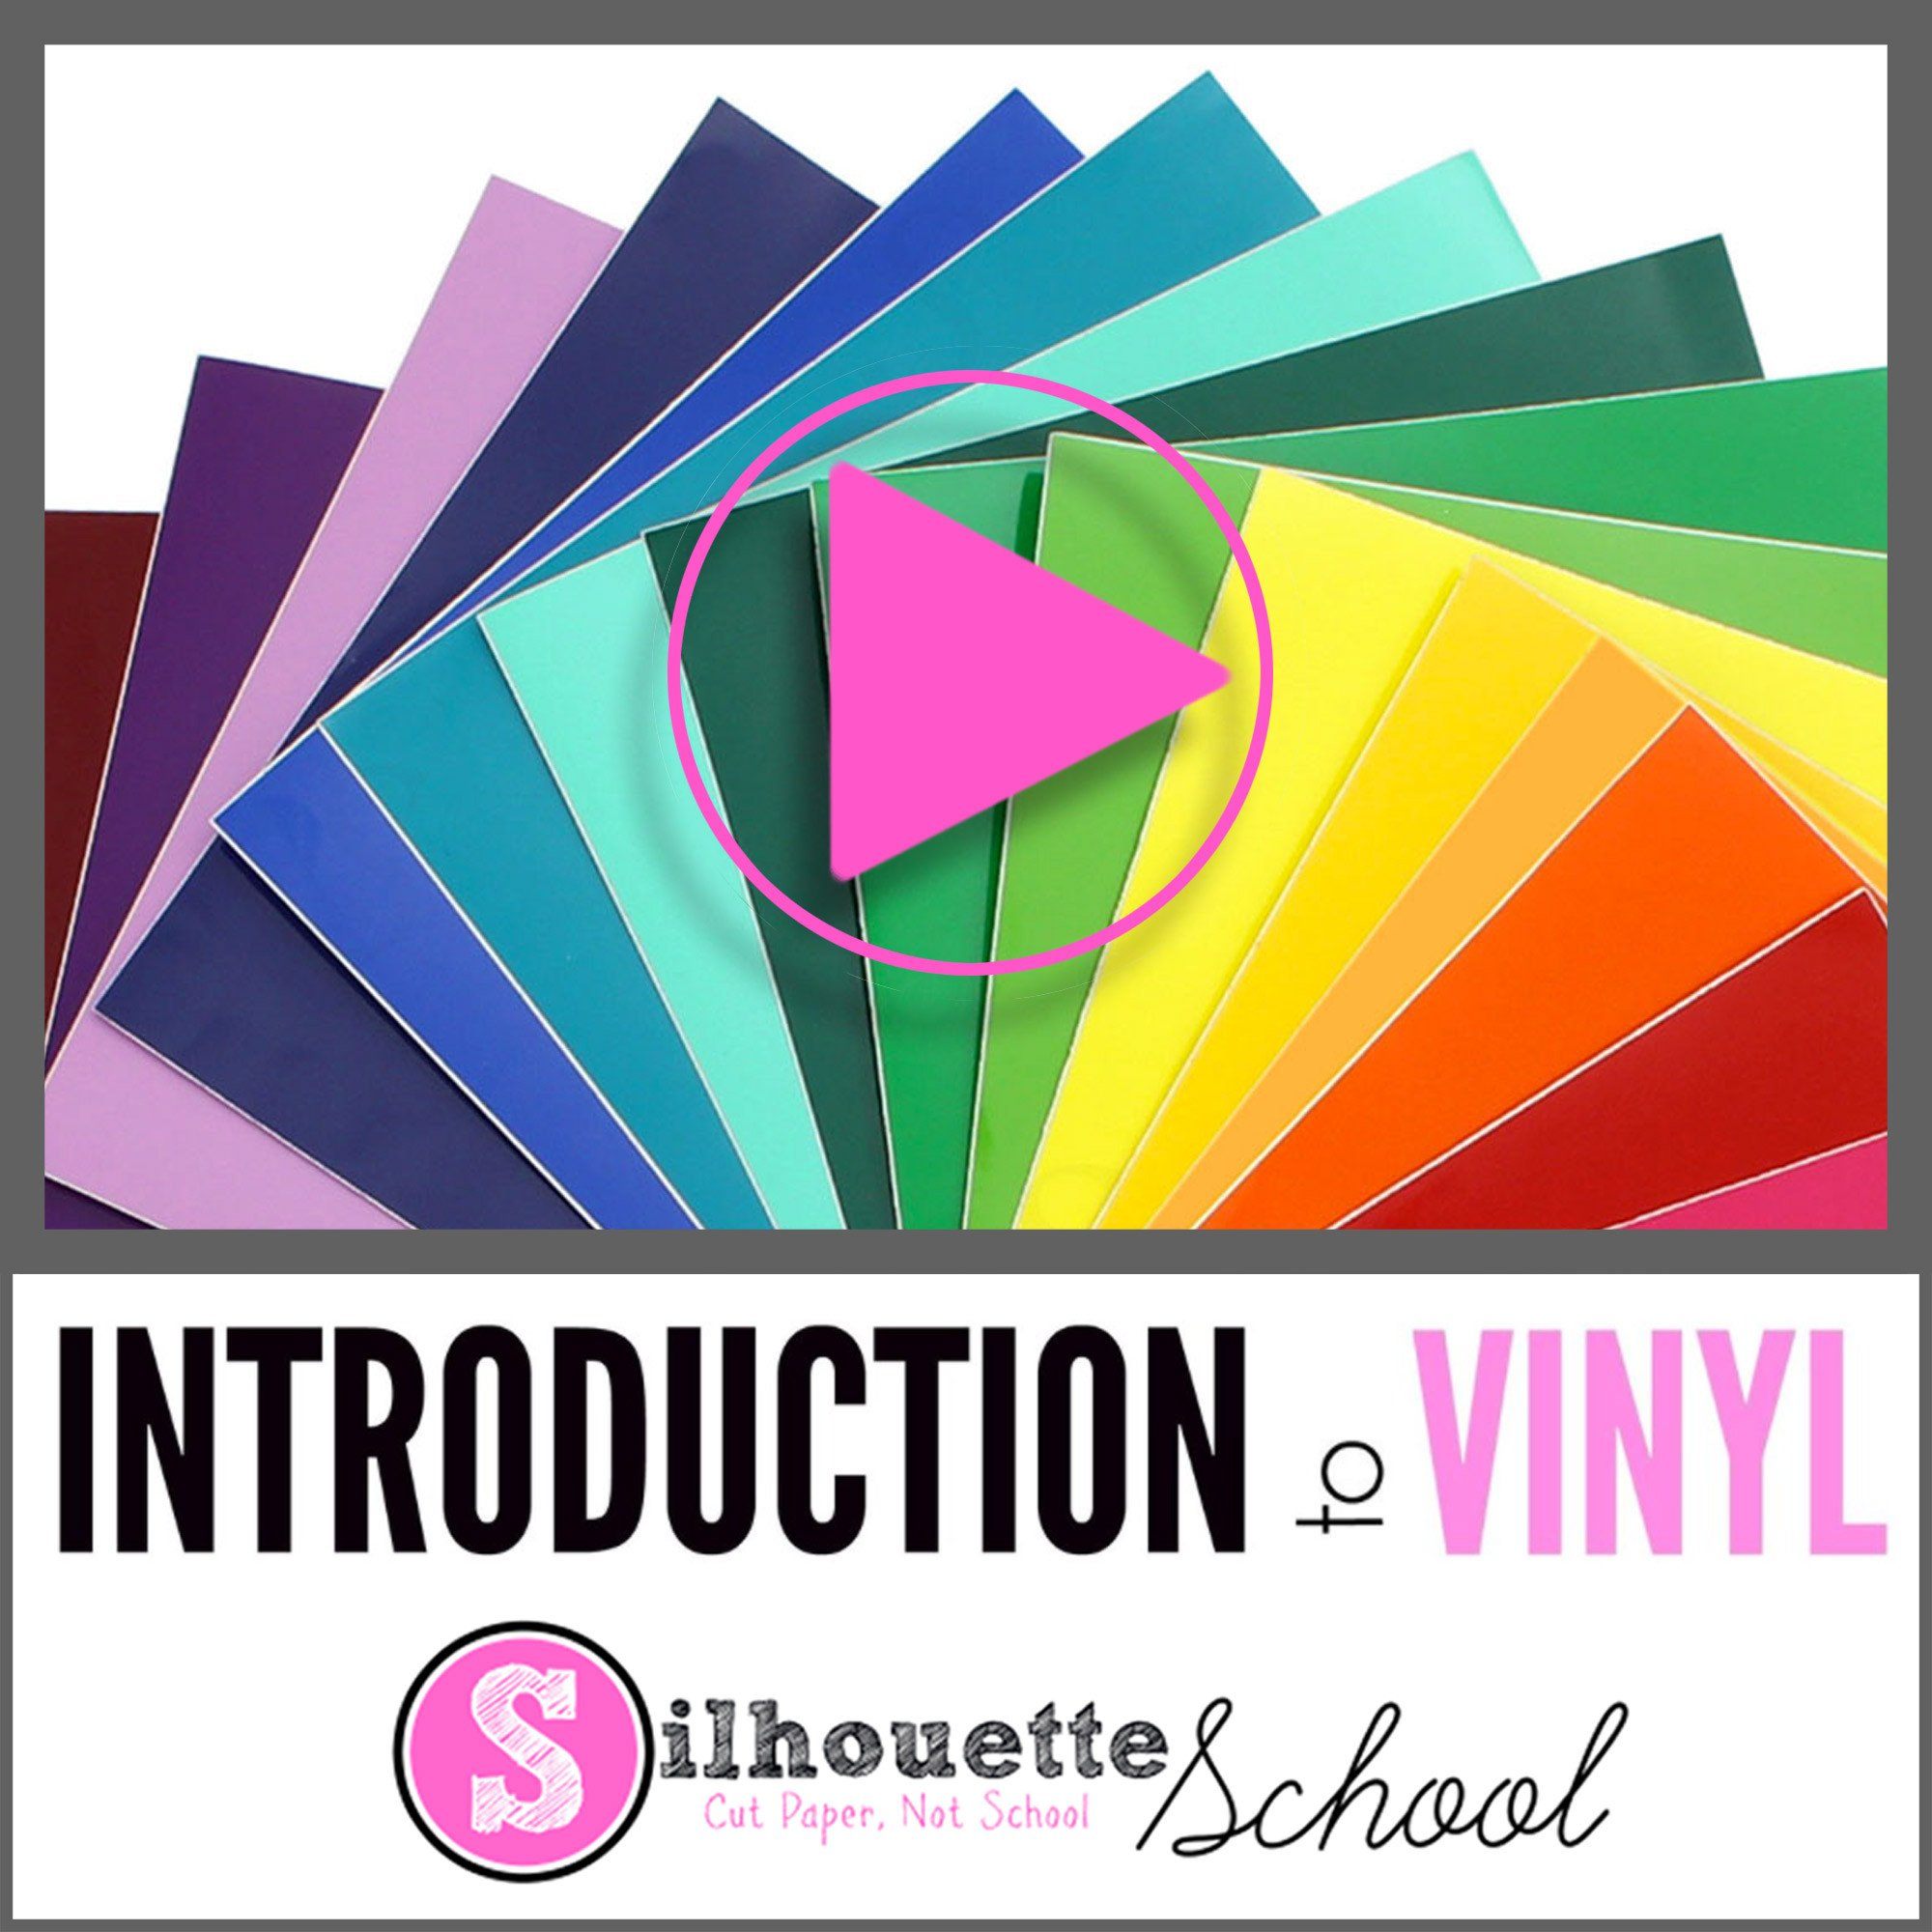 6 different - Silhouette School with Melissa Viscount